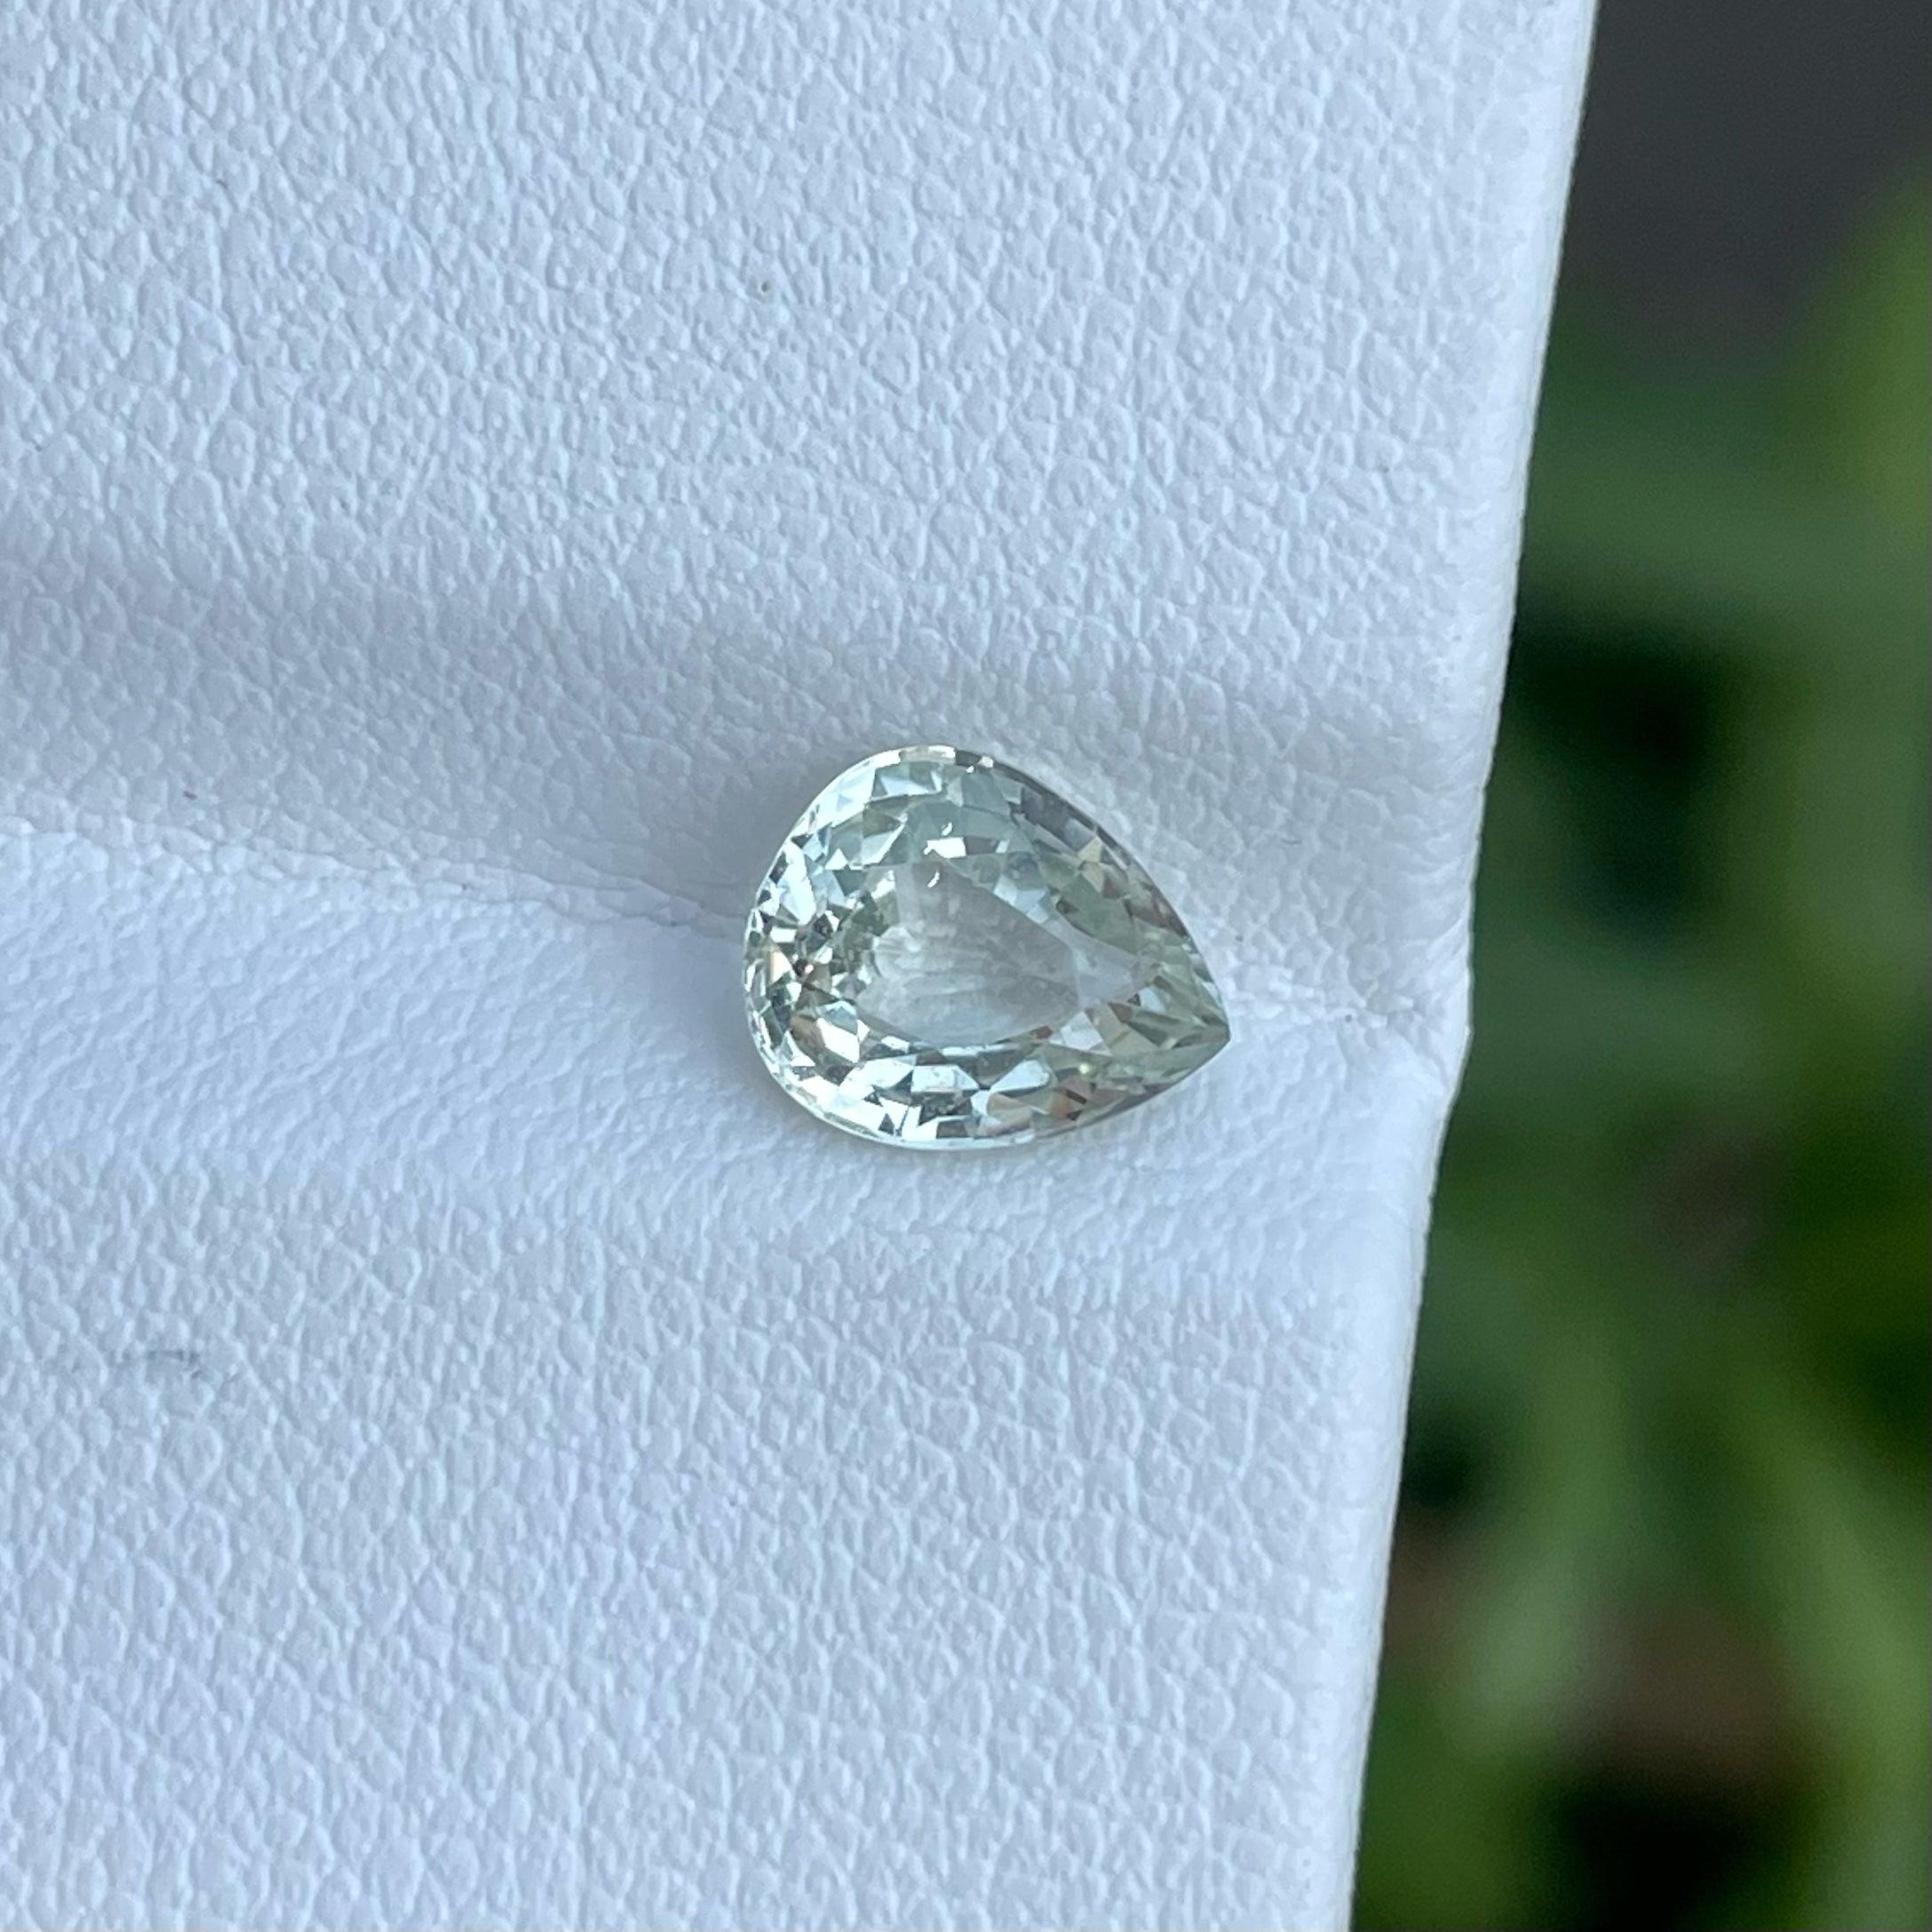 Natural Rare White Sapphire Loose Stone, Available For Sale At Wholesale Price Natural High Quality VVS Clarity 1.75 Carats Heated Sapphire From Sri Lanka.

Product Information:
GEMSTONE TYPE:	Natural Rare White Sapphire Loose Stone
WEIGHT:	1.75